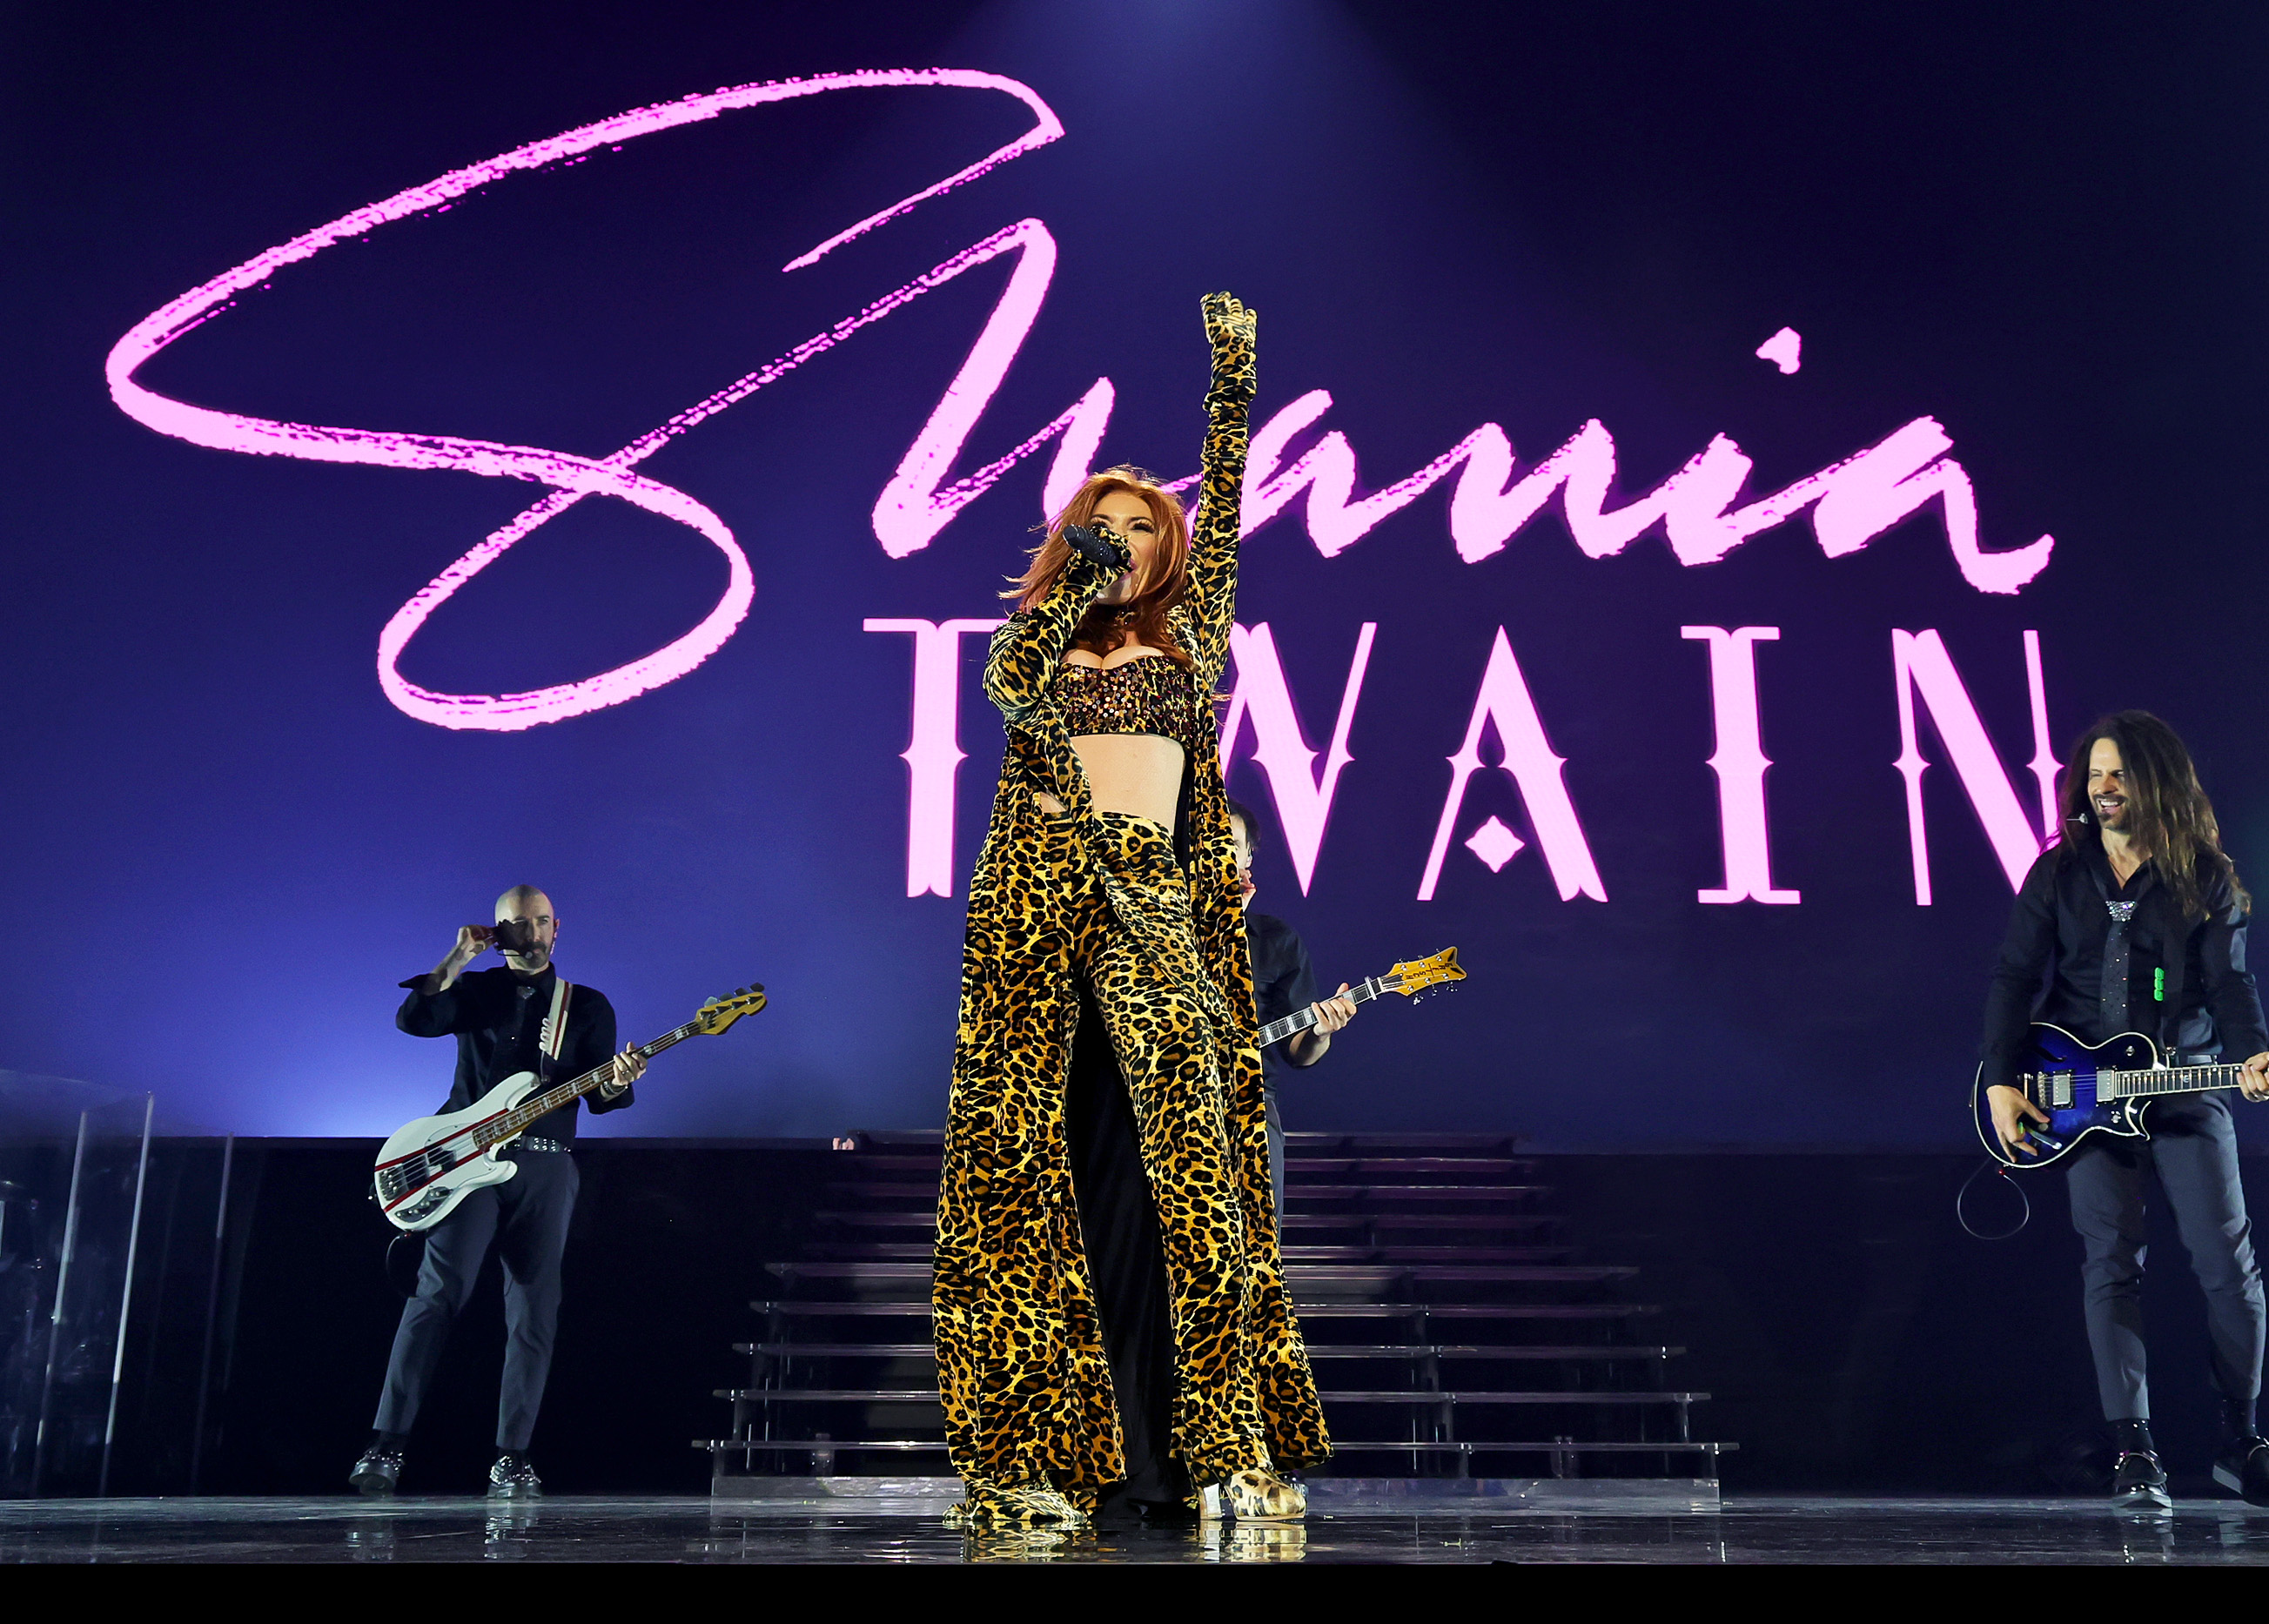 Shania Twain performs onstage during her 'Queen of Me' tour at Spokane Arena, on April 28, 2023, in Spokane, Washington. | Source: Getty Images